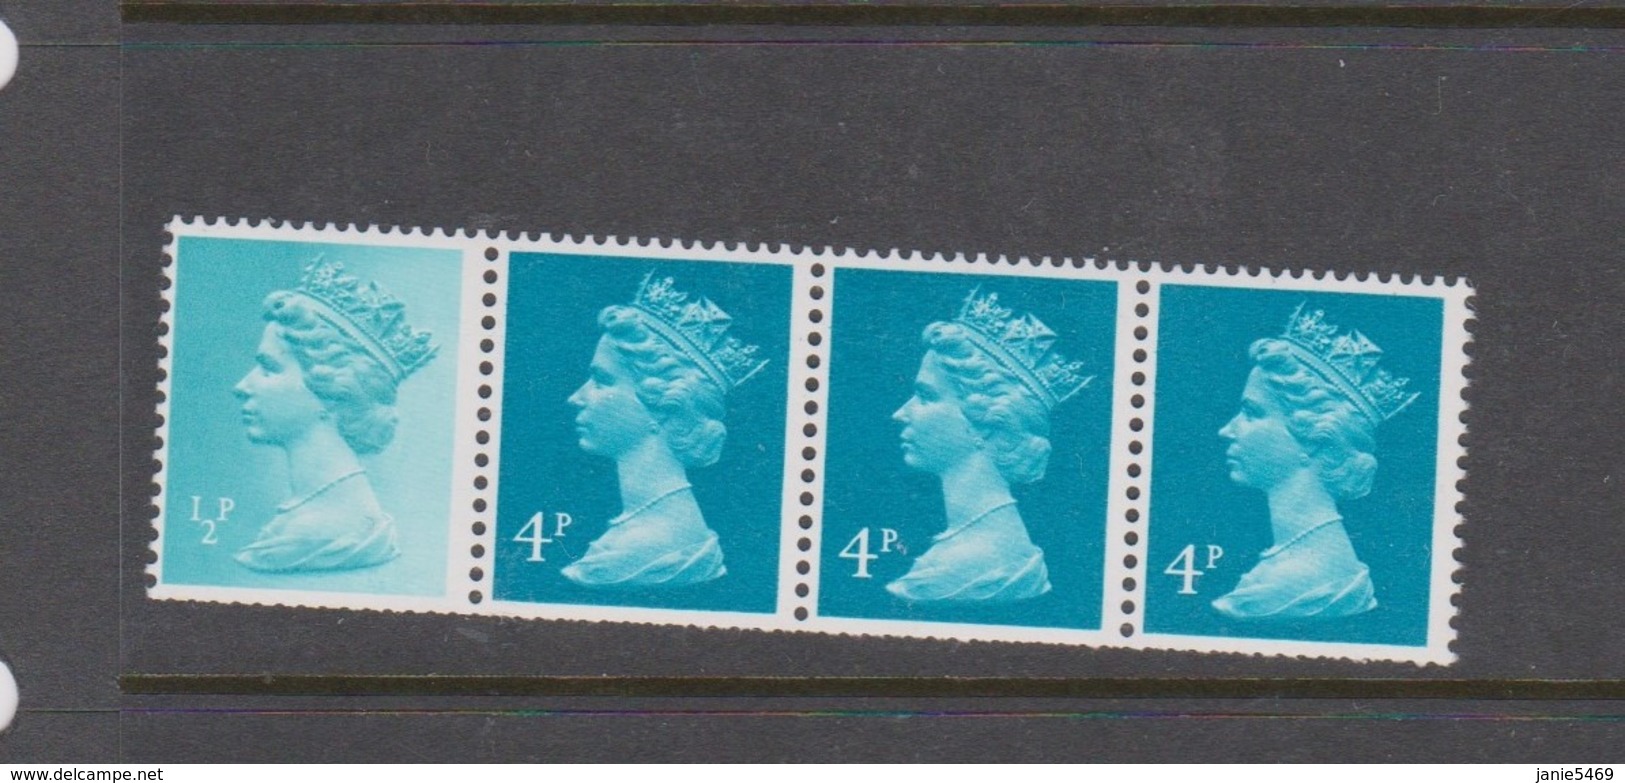 Great Britain SG B 979 Booklet Strip Mint Never Hinged - Used Stamps